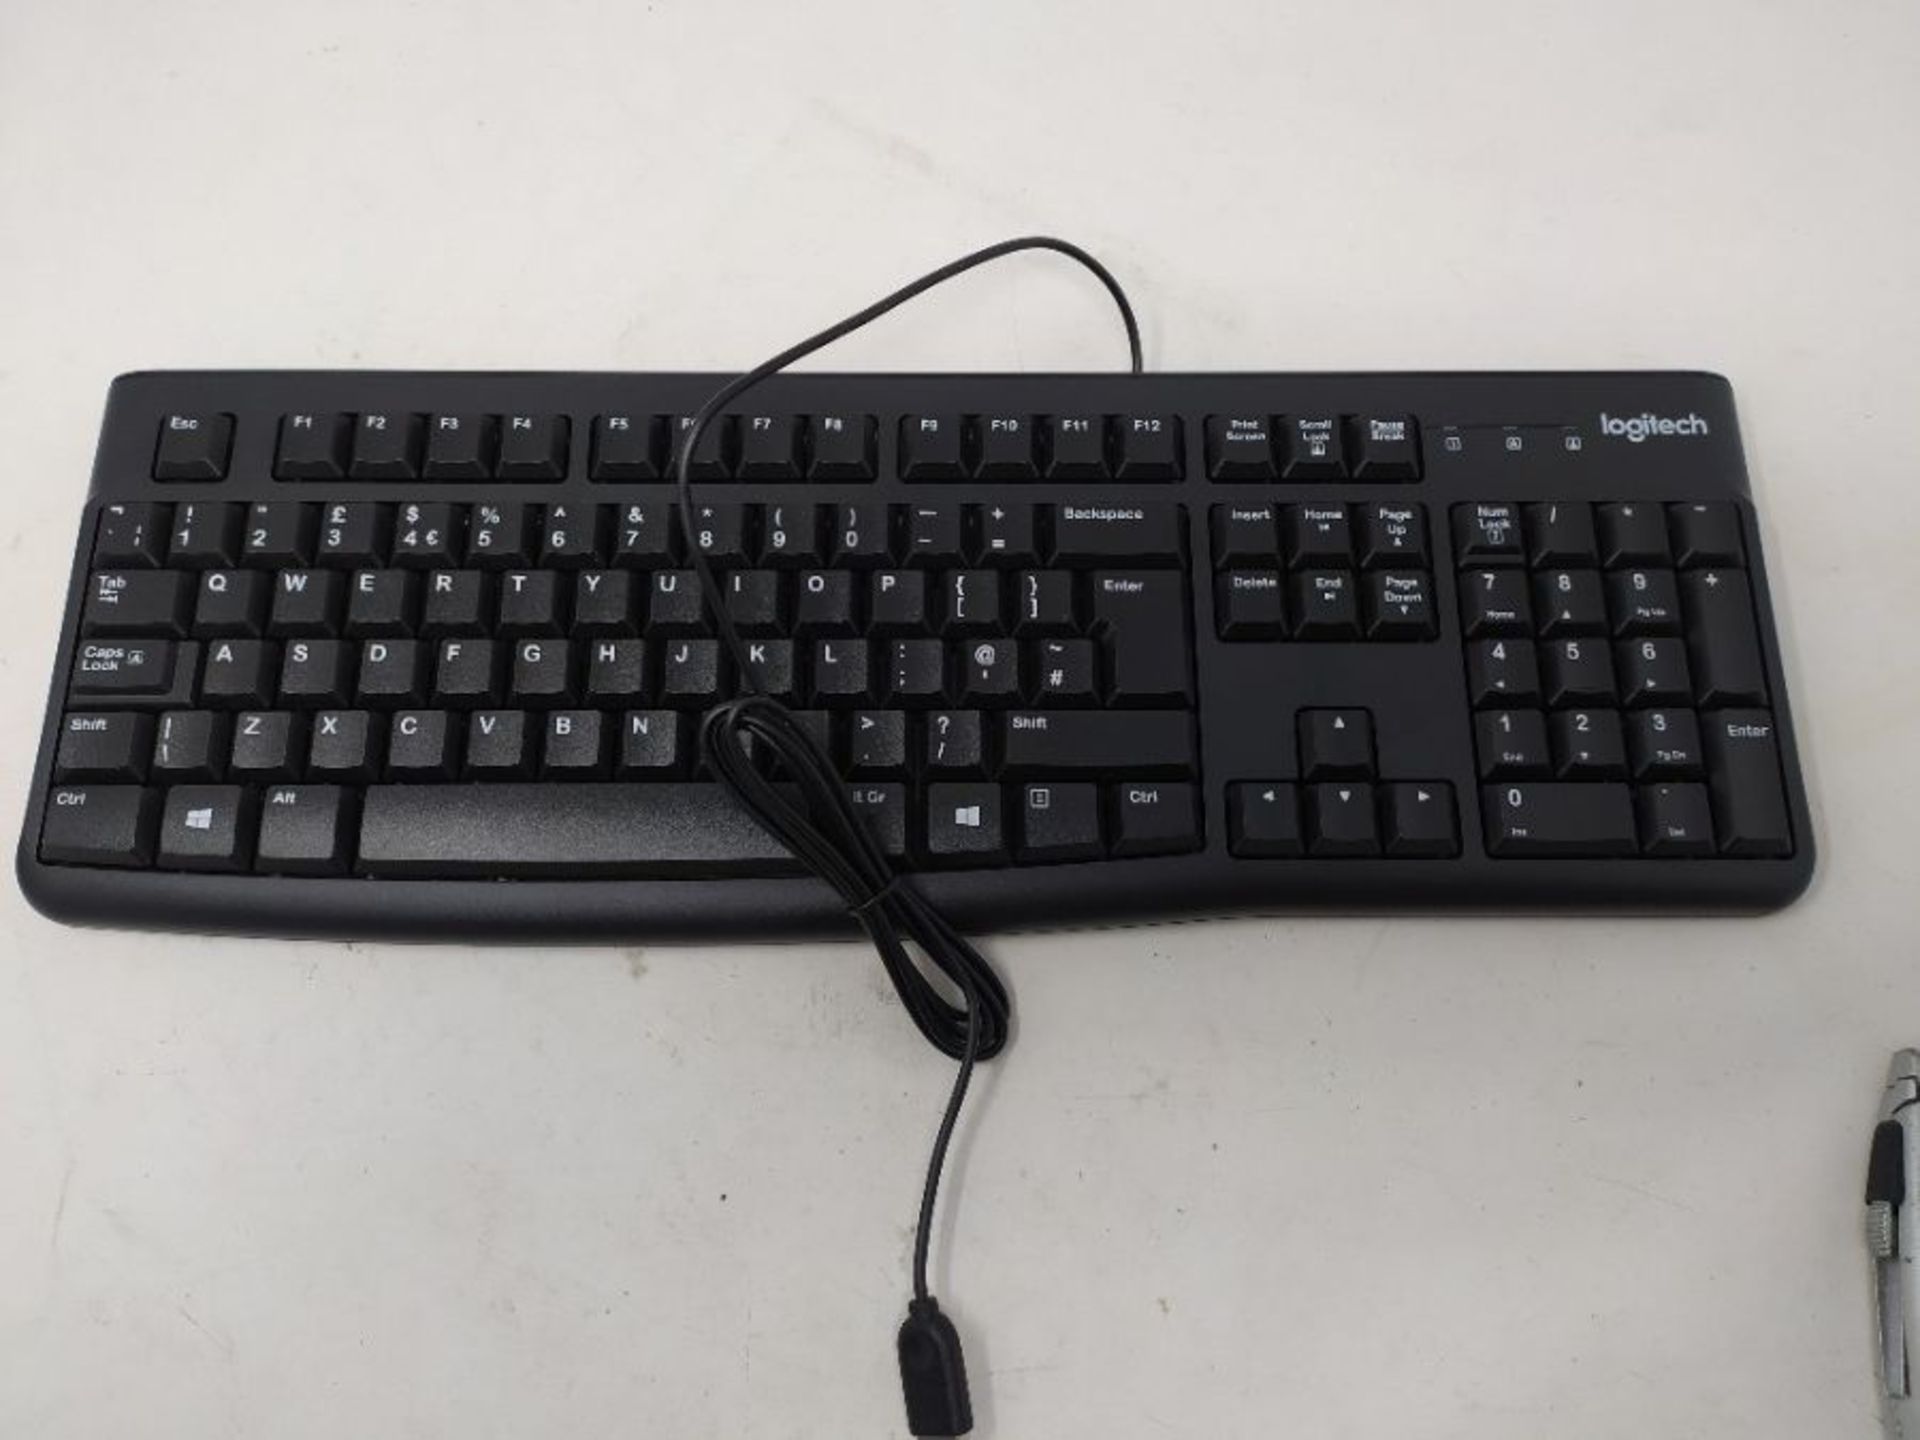 Logitech K120 Wired Business Keyboard for Windows or Linux, USB Plug-and-Play, Full-Si - Image 2 of 2